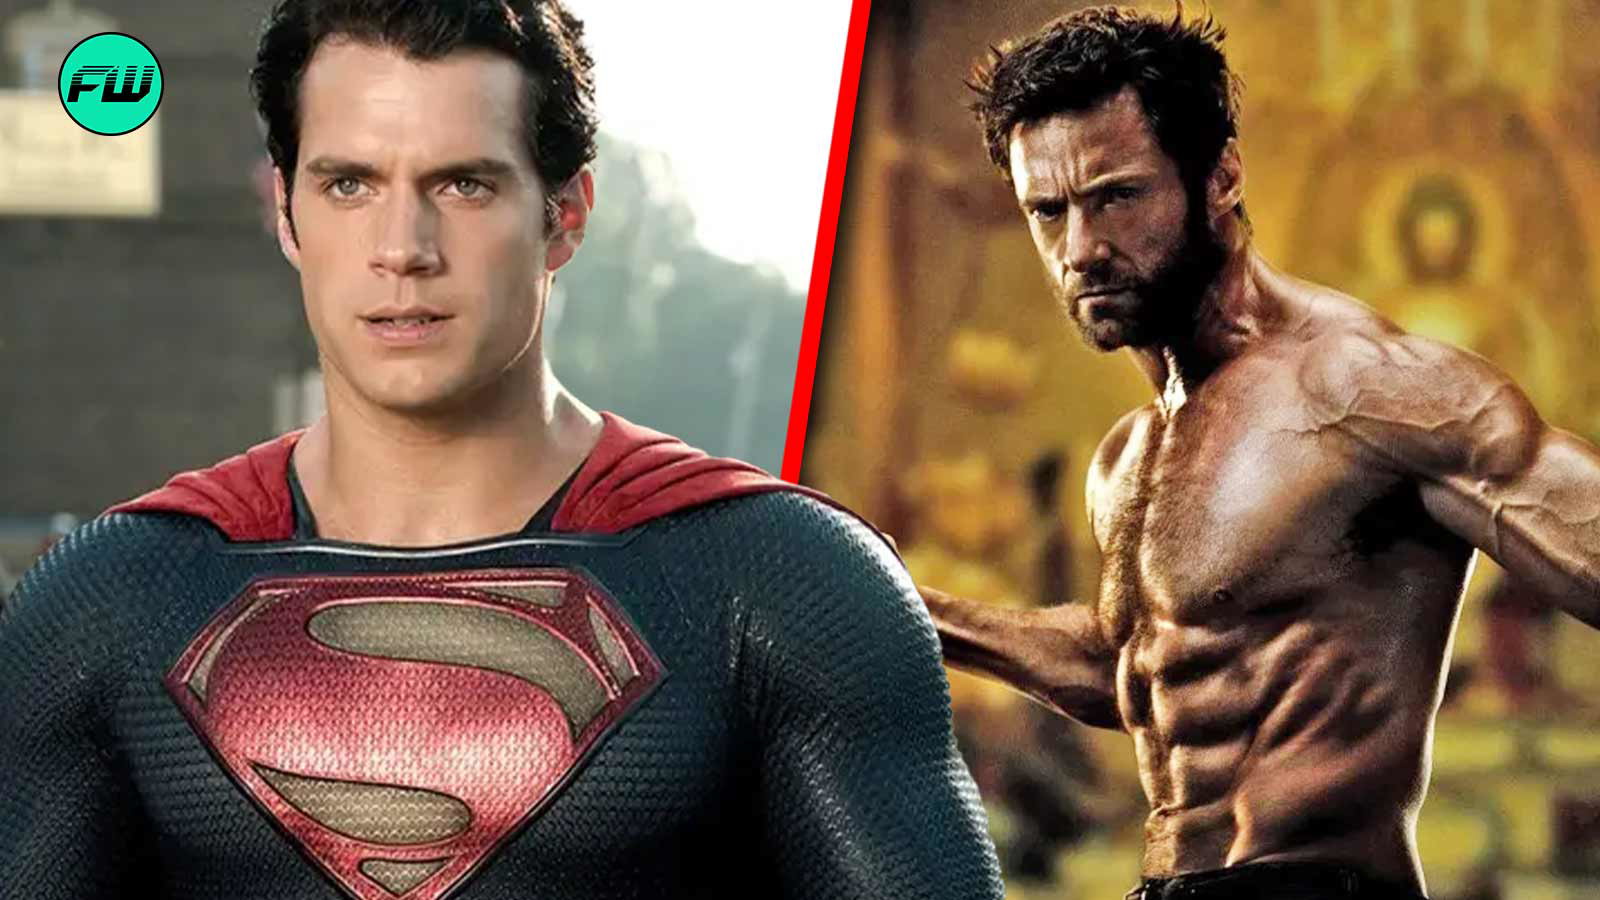 Henry Cavill Showed His Wolverine Like Physique That Would Even Give Hugh Jackman a Run For His Money a Decade Ago in Man of Steel